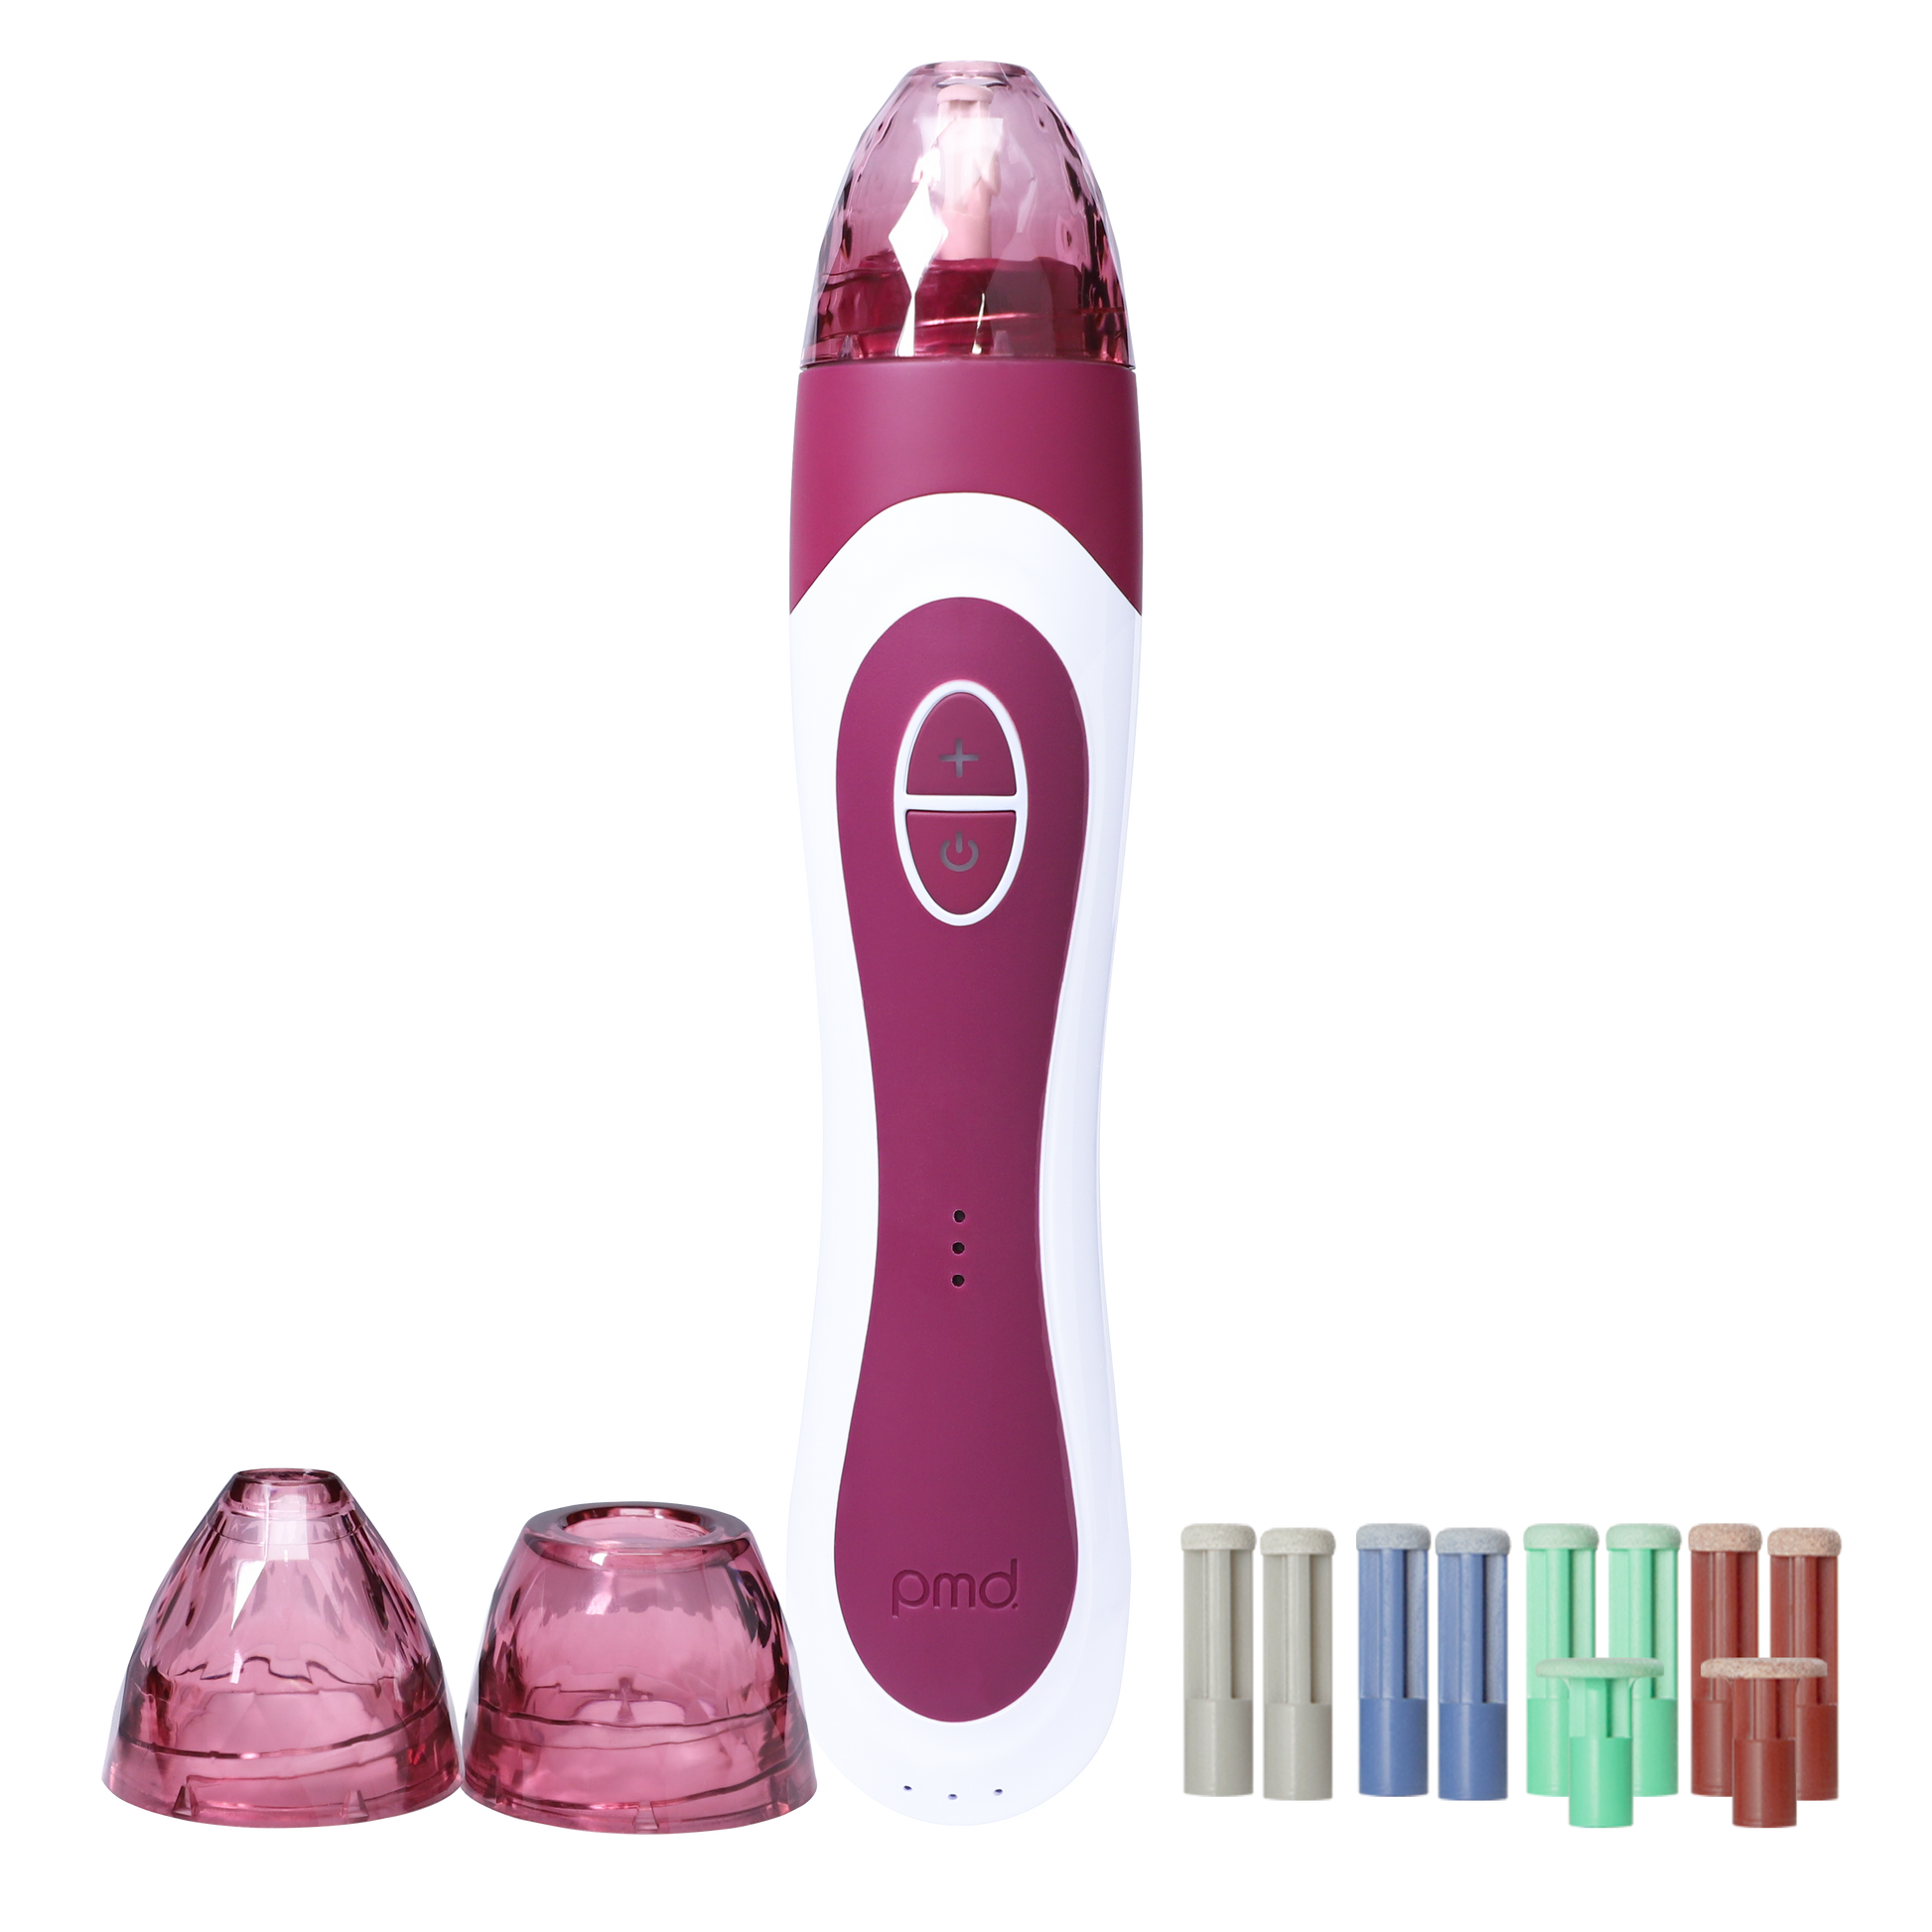 1005-berry?Personal Microderm Elite Pro in Berry